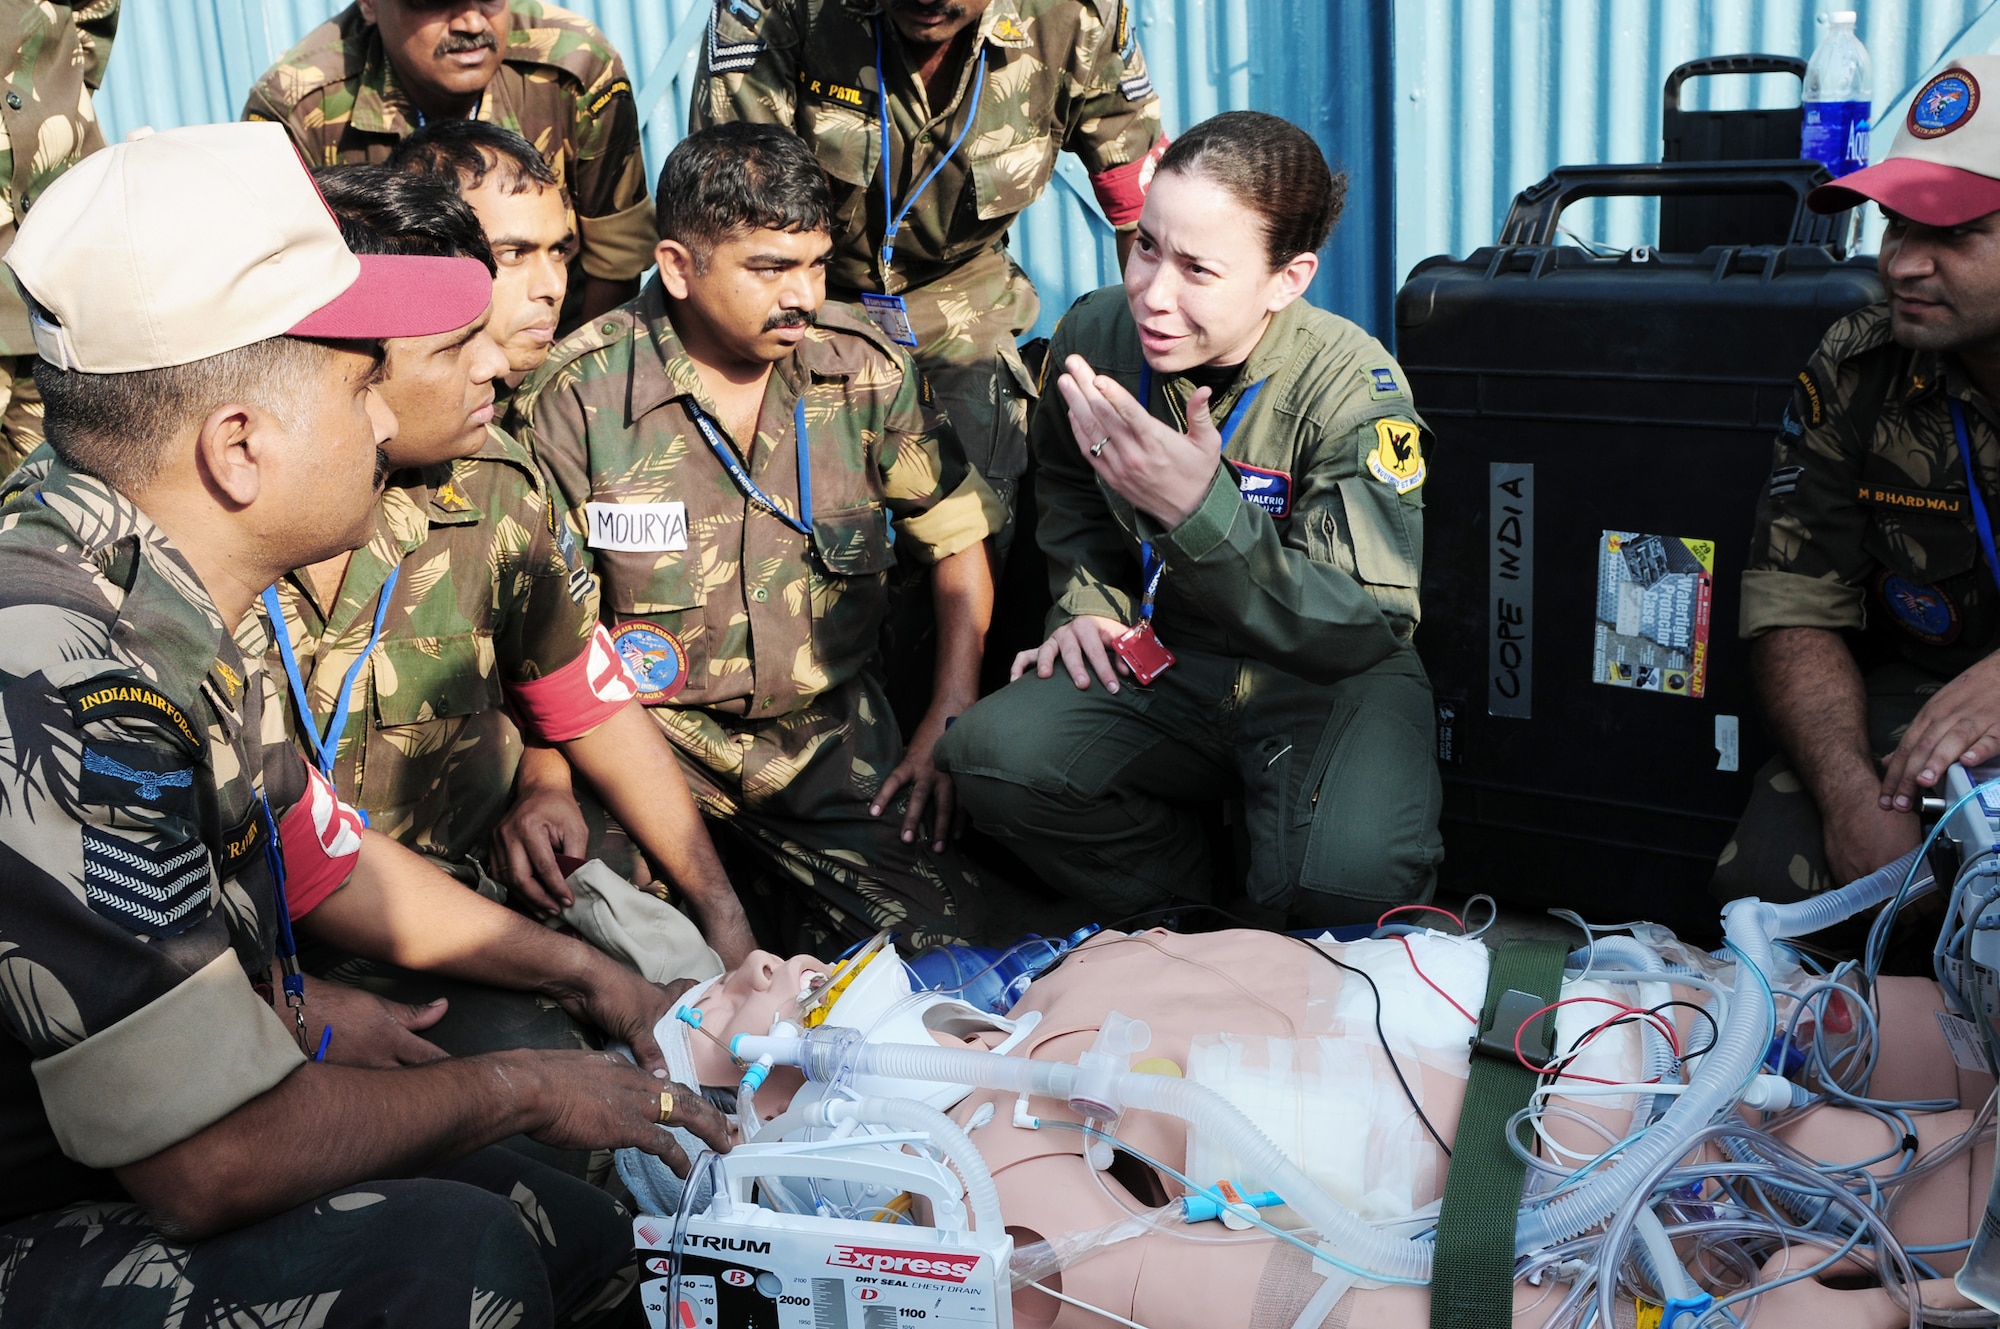 Capt. Veronica Valerio explains emergency response techniques to several Indian air force medics during Cope India at Air Force Station Agra, India, Oct. 22, 2009. Captain Valerio is from the 18th Wing at Kadena Air Base, Japan. Cope India is a United States and India airlift exercise that provides training for humanitarian assistance and disaster relief operations. (U.S. Air Force photo/Capt. Genieve David)